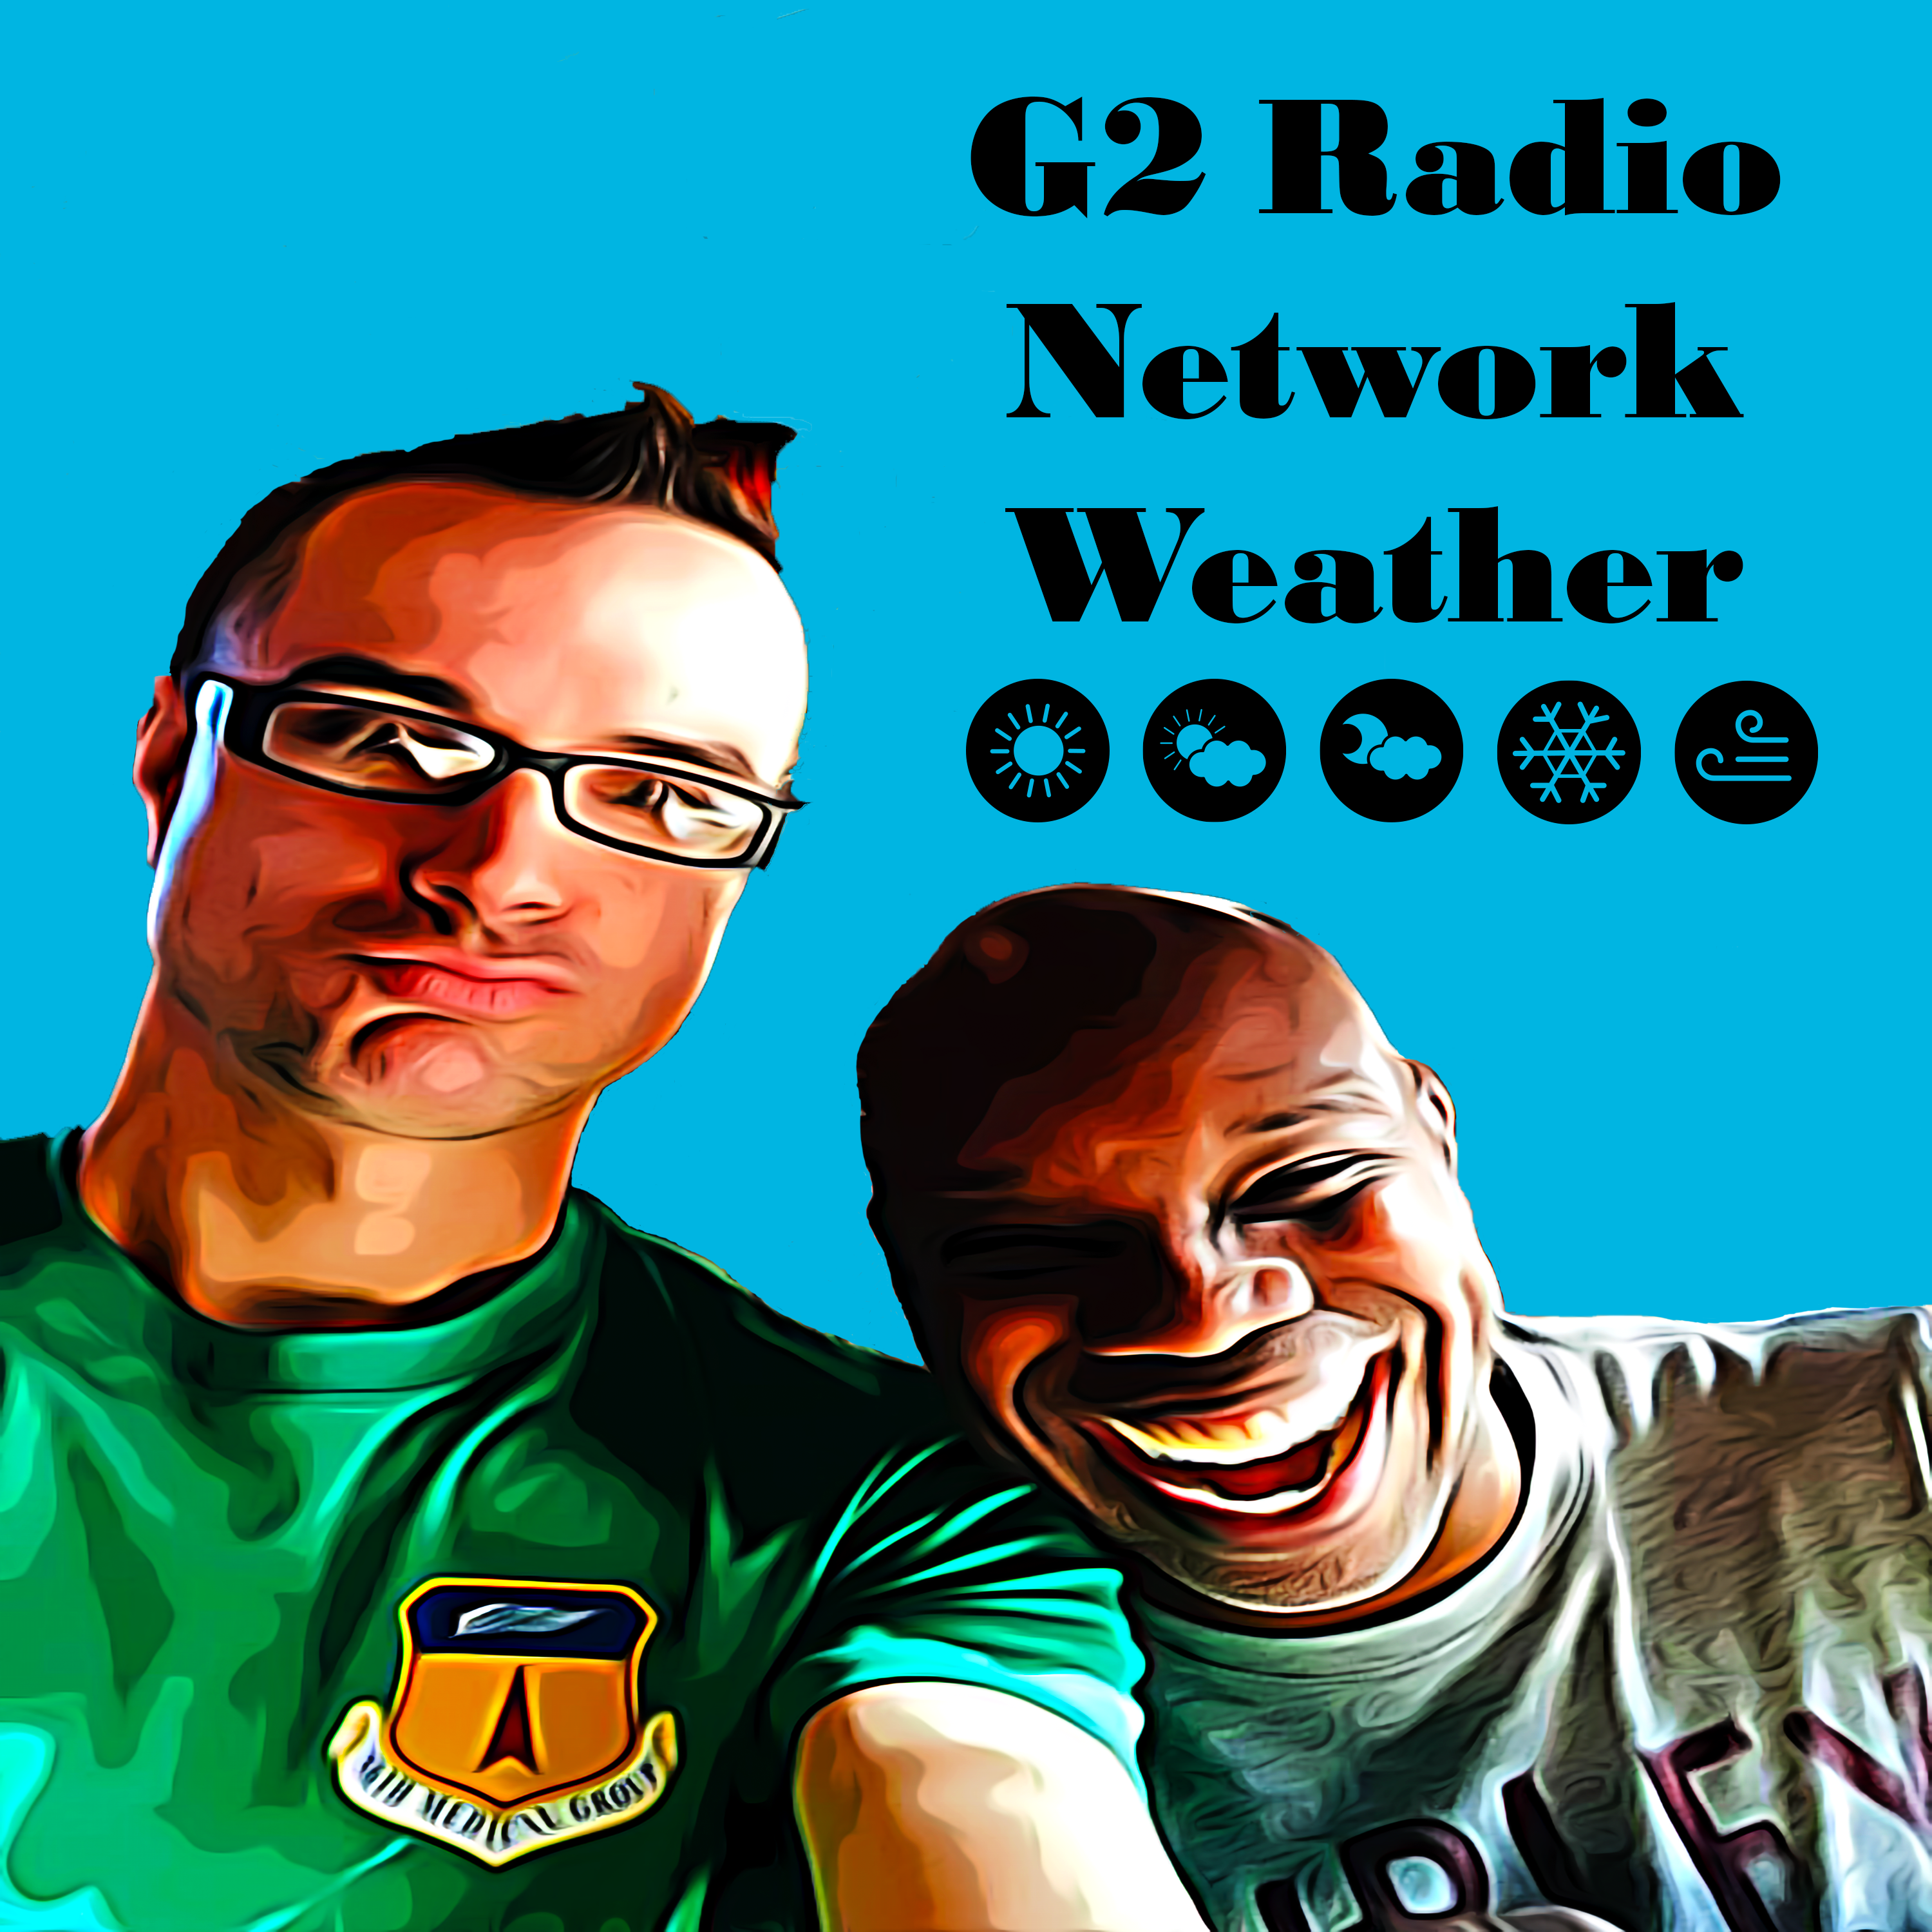 Art for Friday 2 Dec by G2 Radio Network Weather